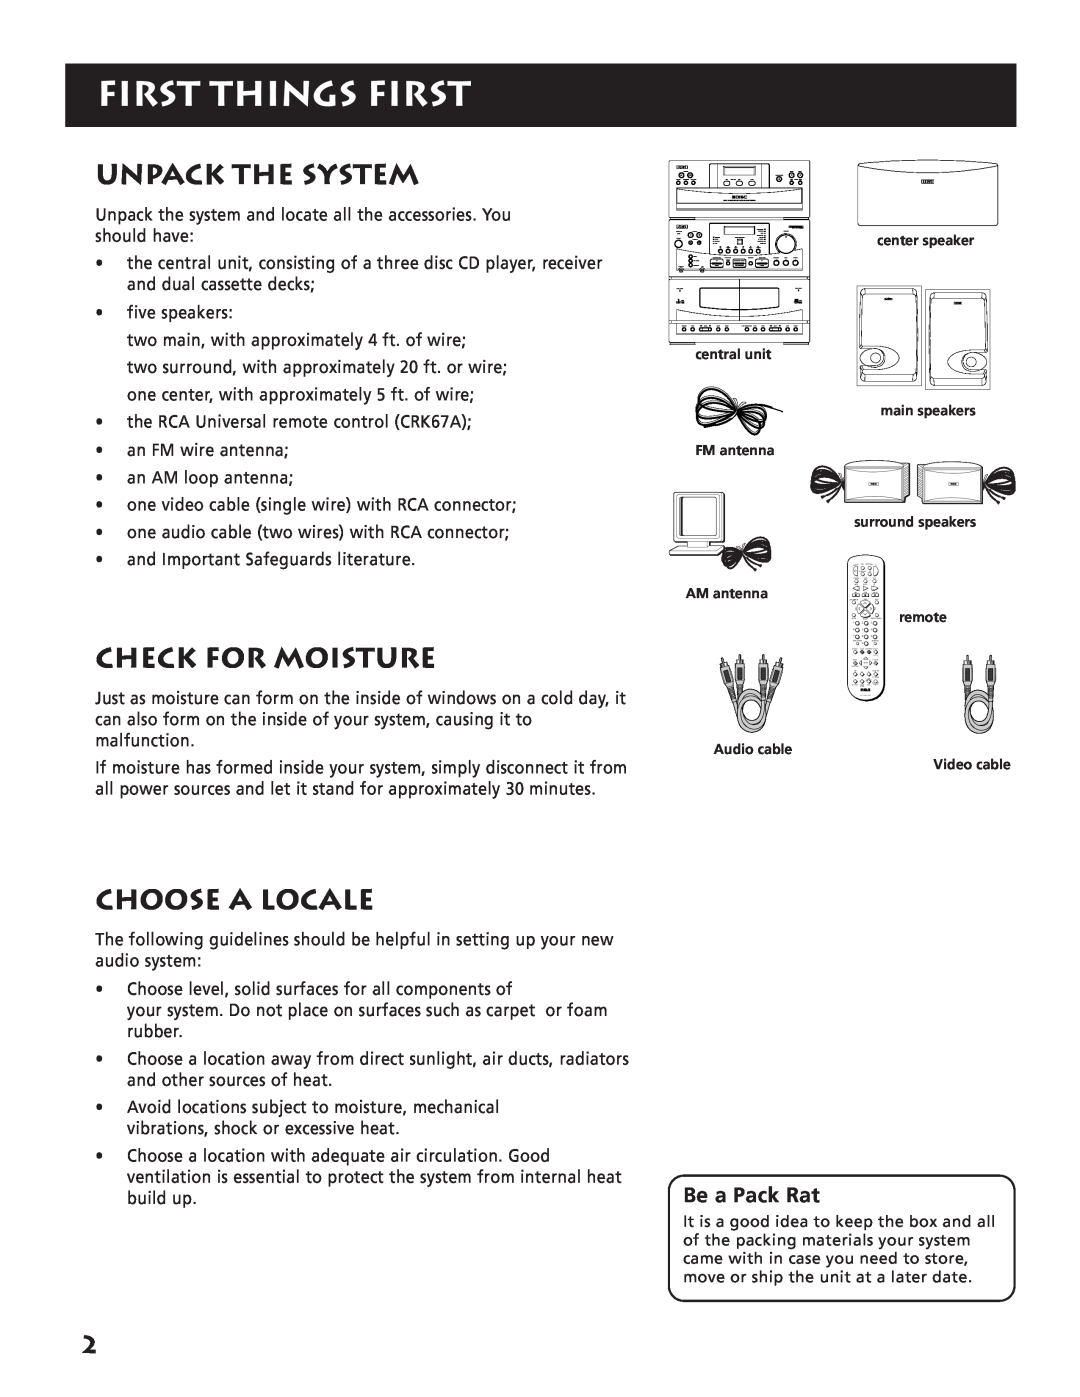 RCA RP-9380 manual First Things First, Unpack The System, Check For Moisture, Choose A Locale 